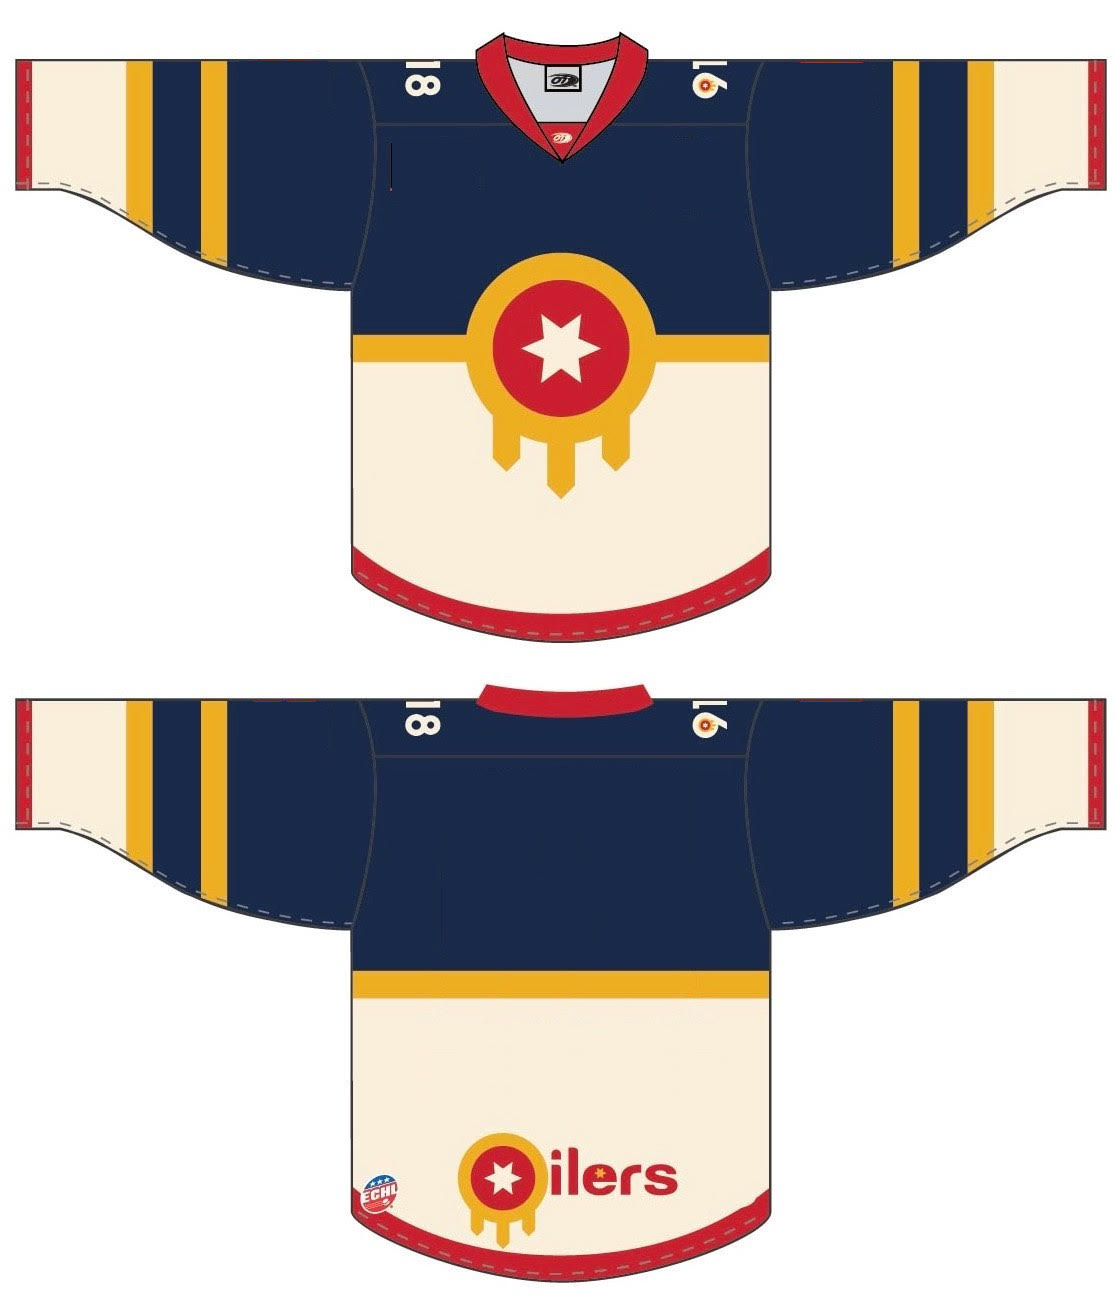 tulsa oilers jersey for sale